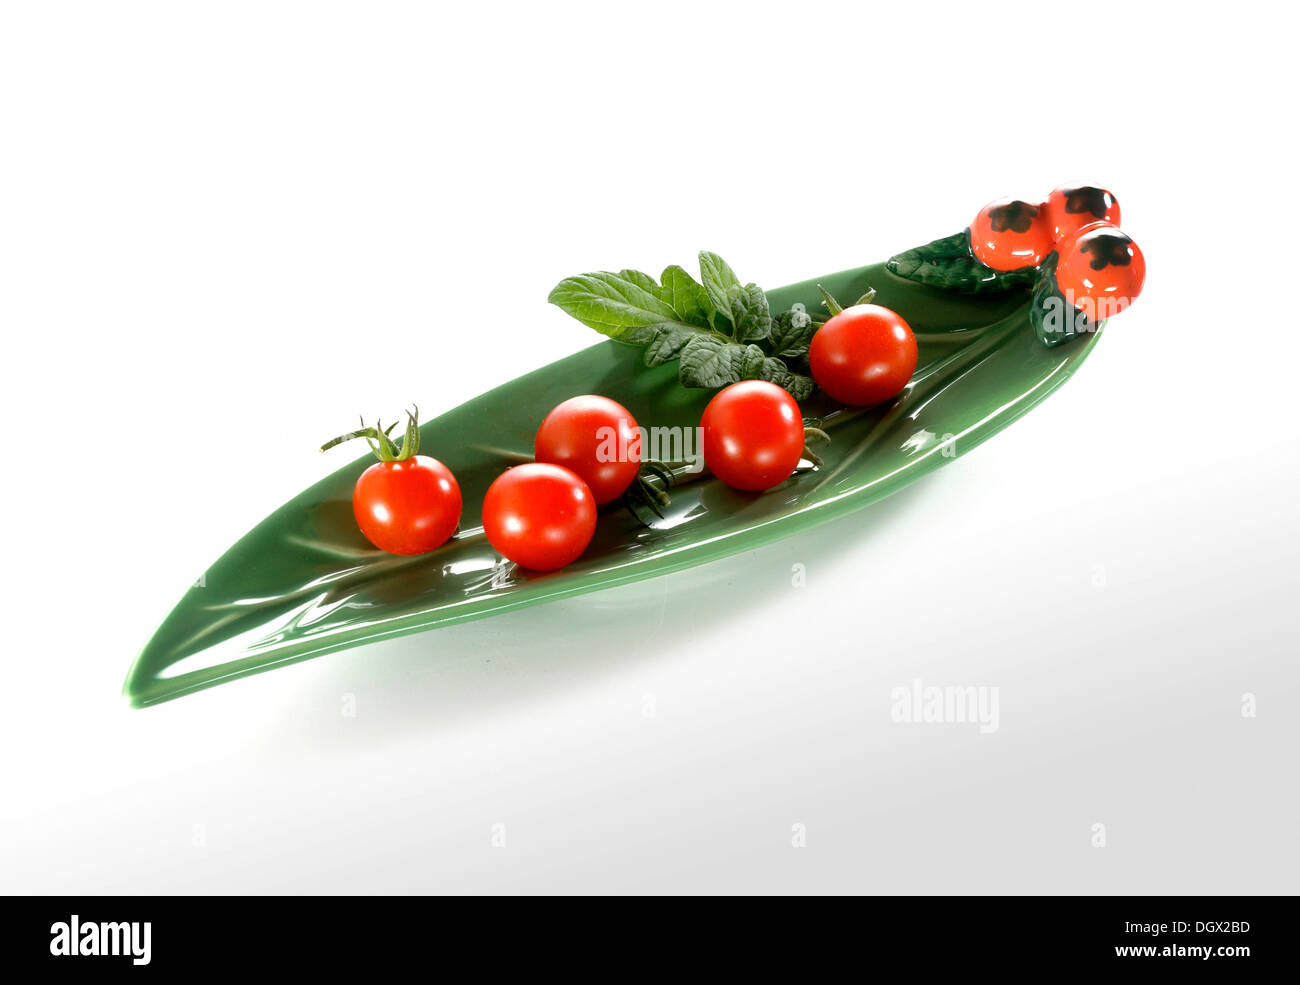 Cherry tomatoes in an elongated leaf-shaped bowl Stock Photo